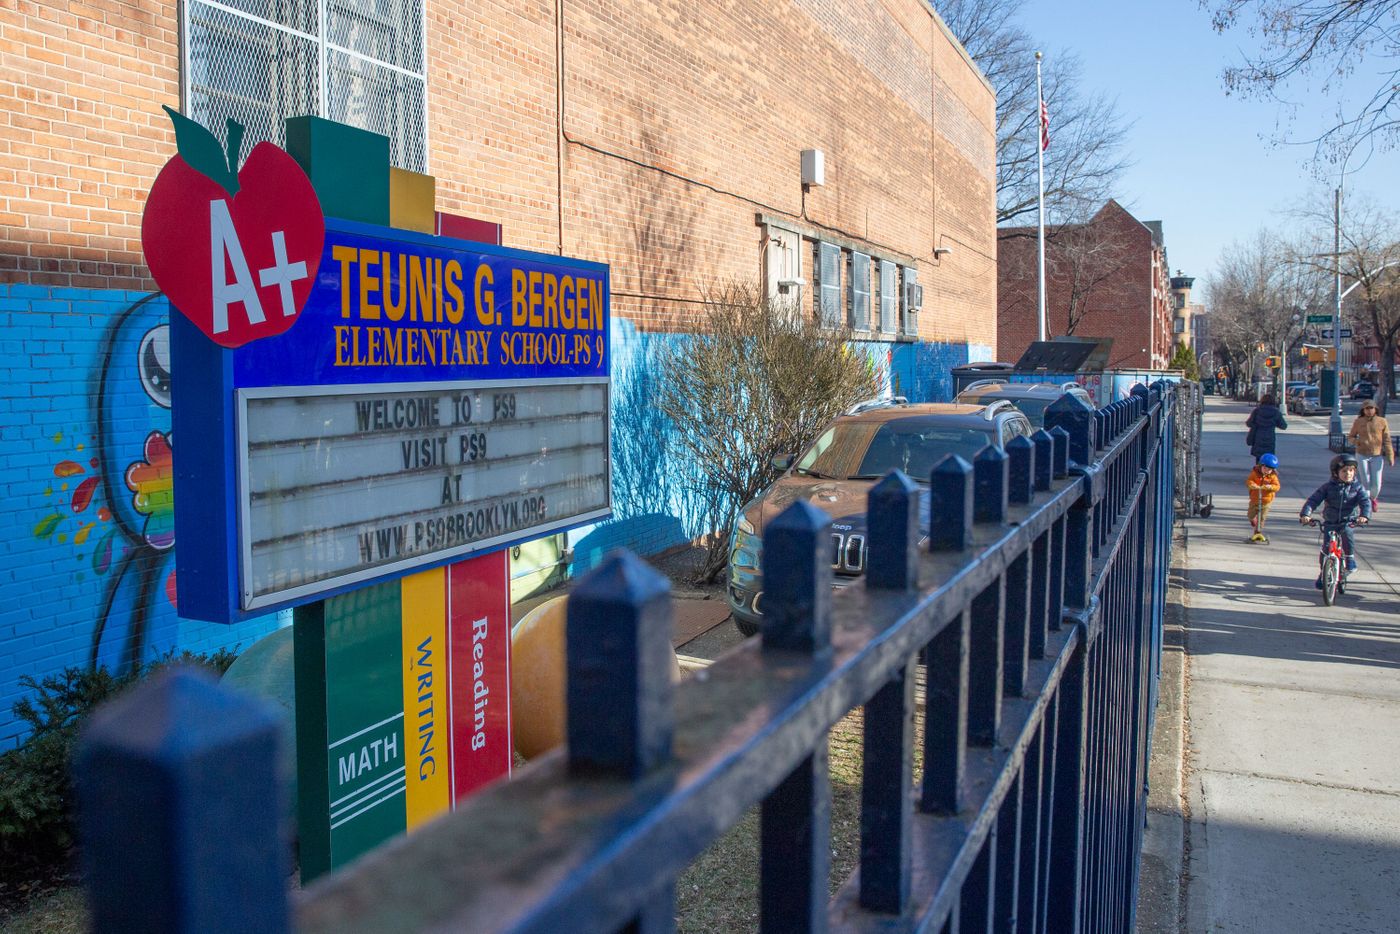 Teunis G. Bergen Elementary School is now named after Sarah Smith Tompkins Garnet, but the signage hasn’t changed.